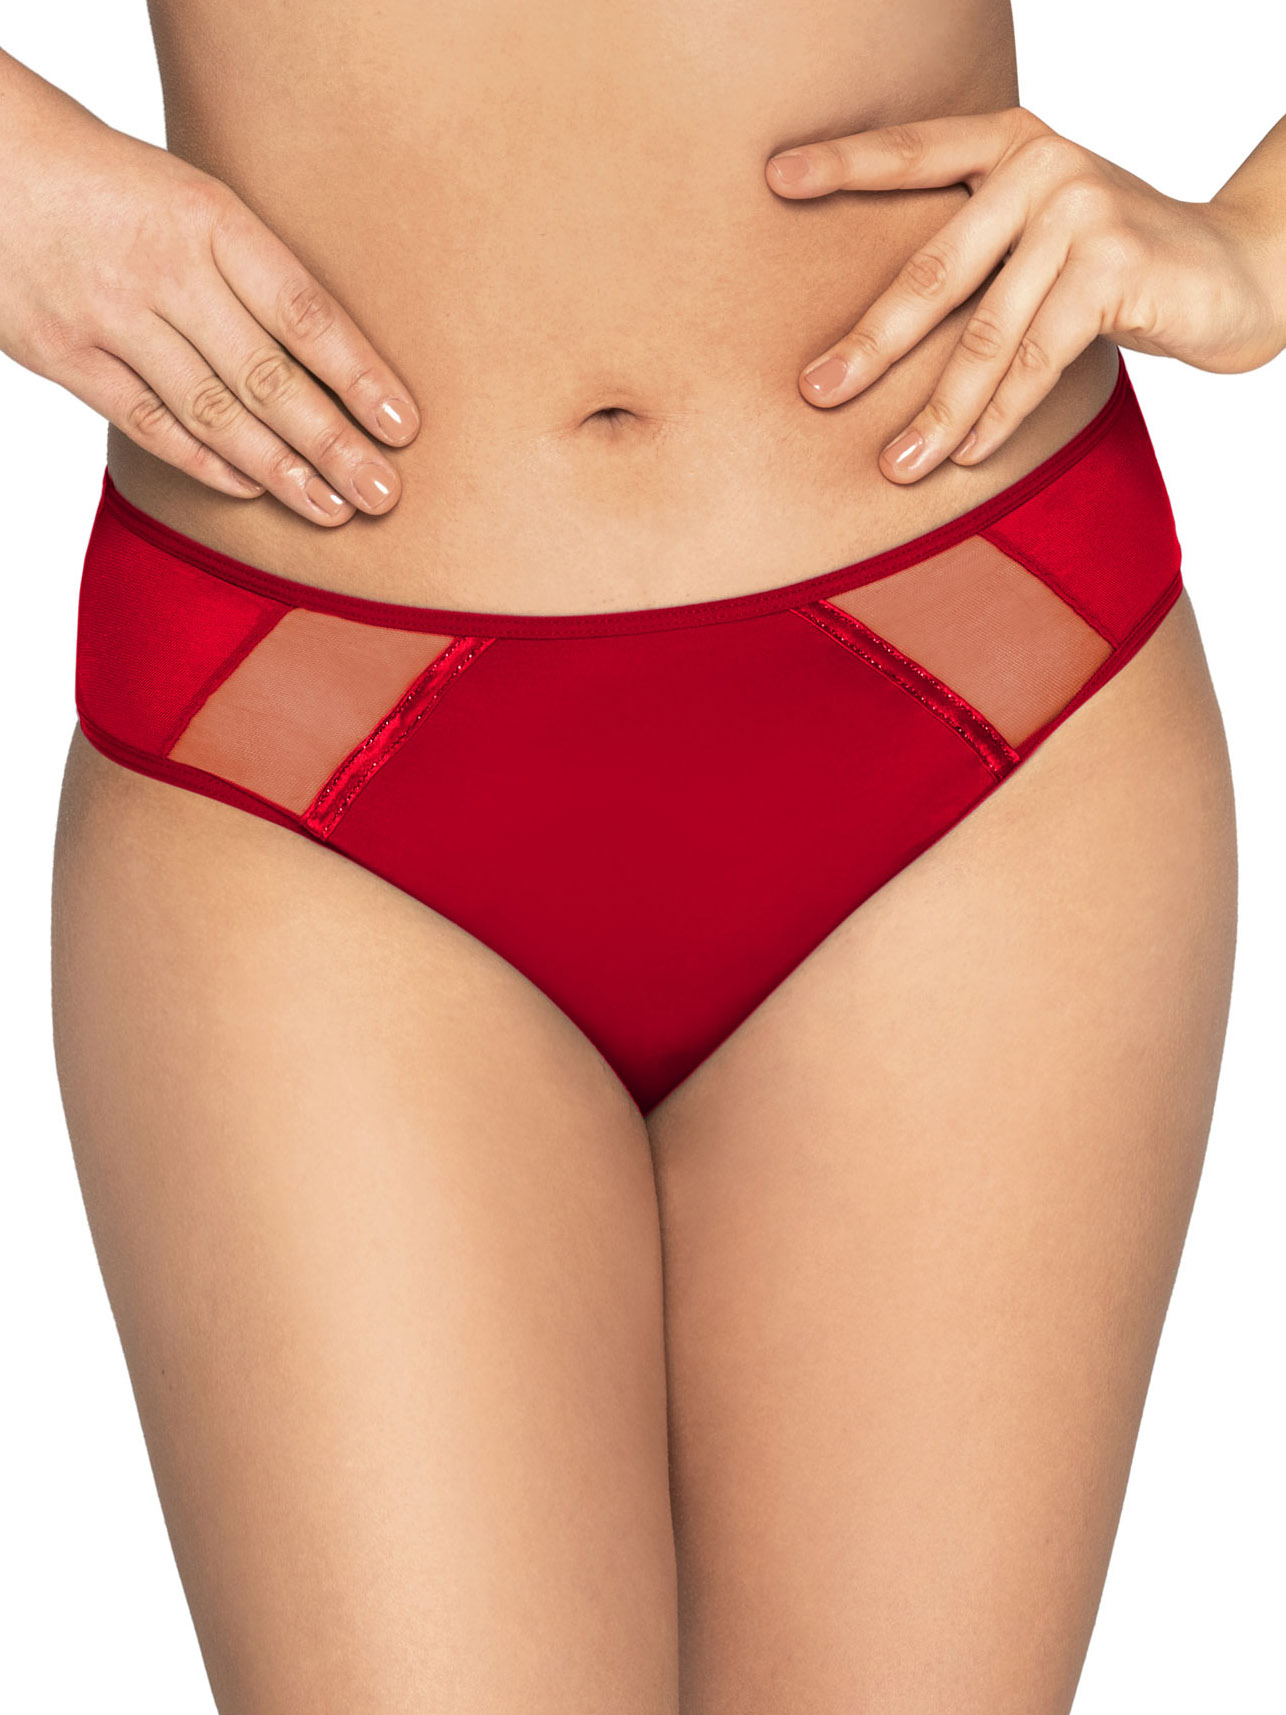 Panties for women Ava 1030/1 Red